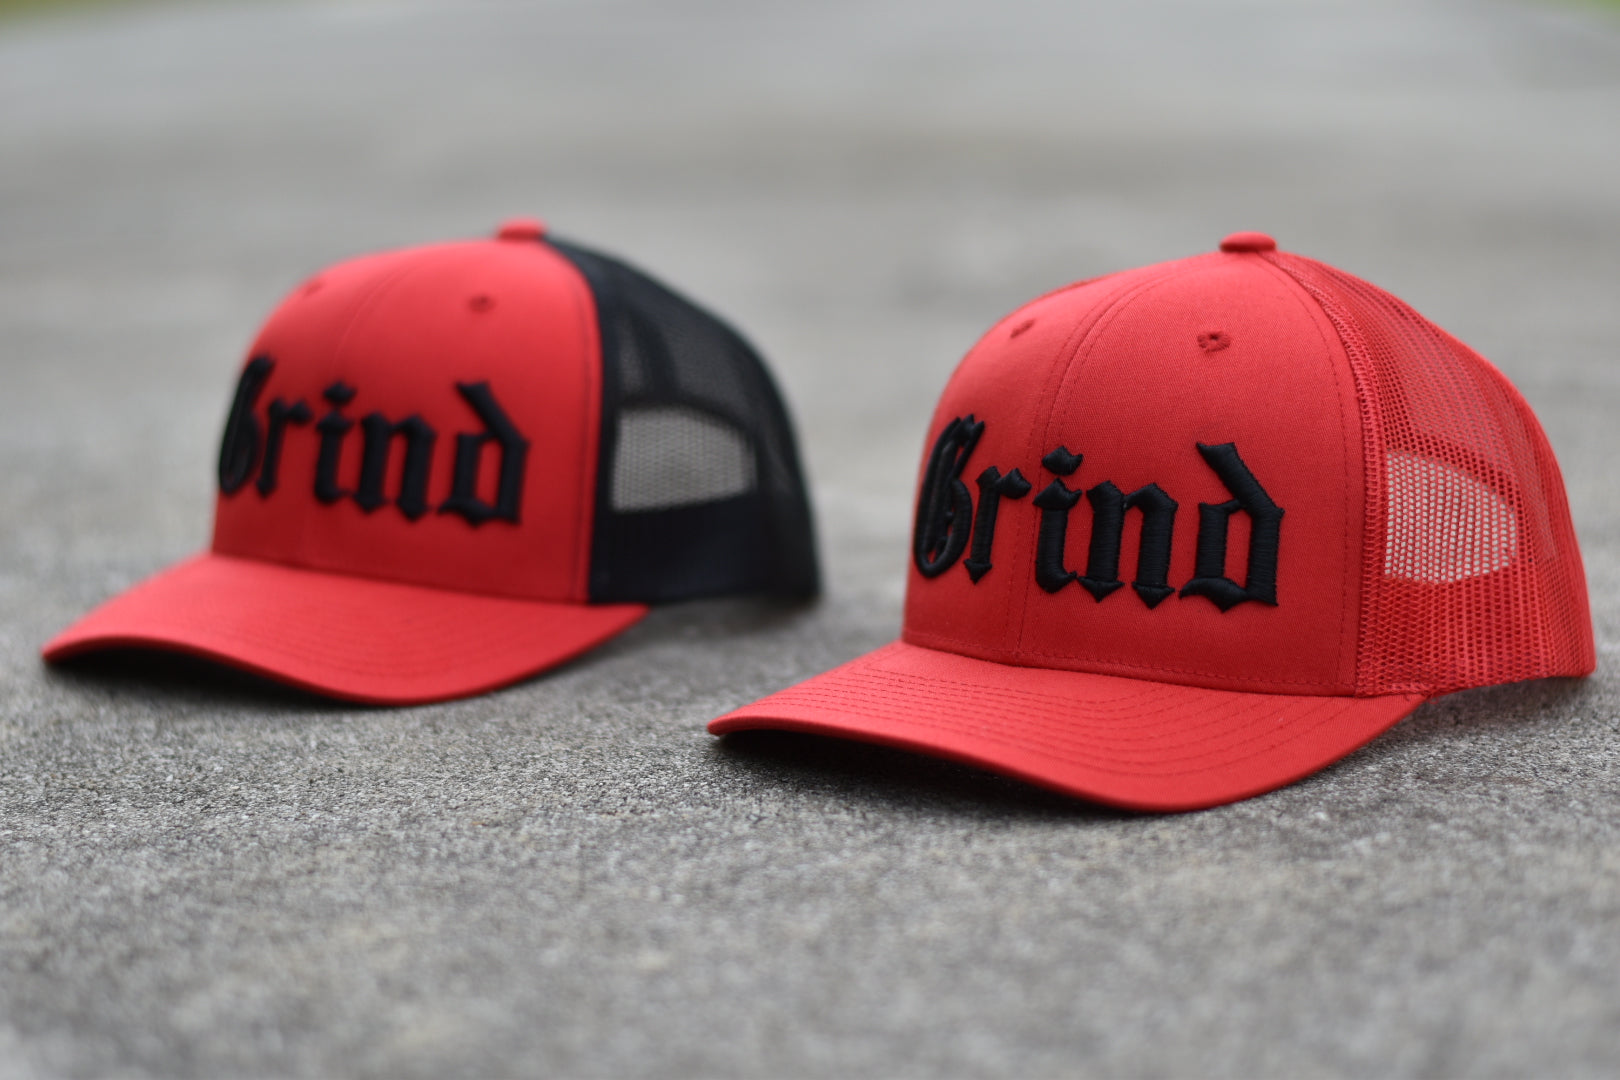 The Grind Athletics Red 3D Classic Snapback Mesh Trucker Caps